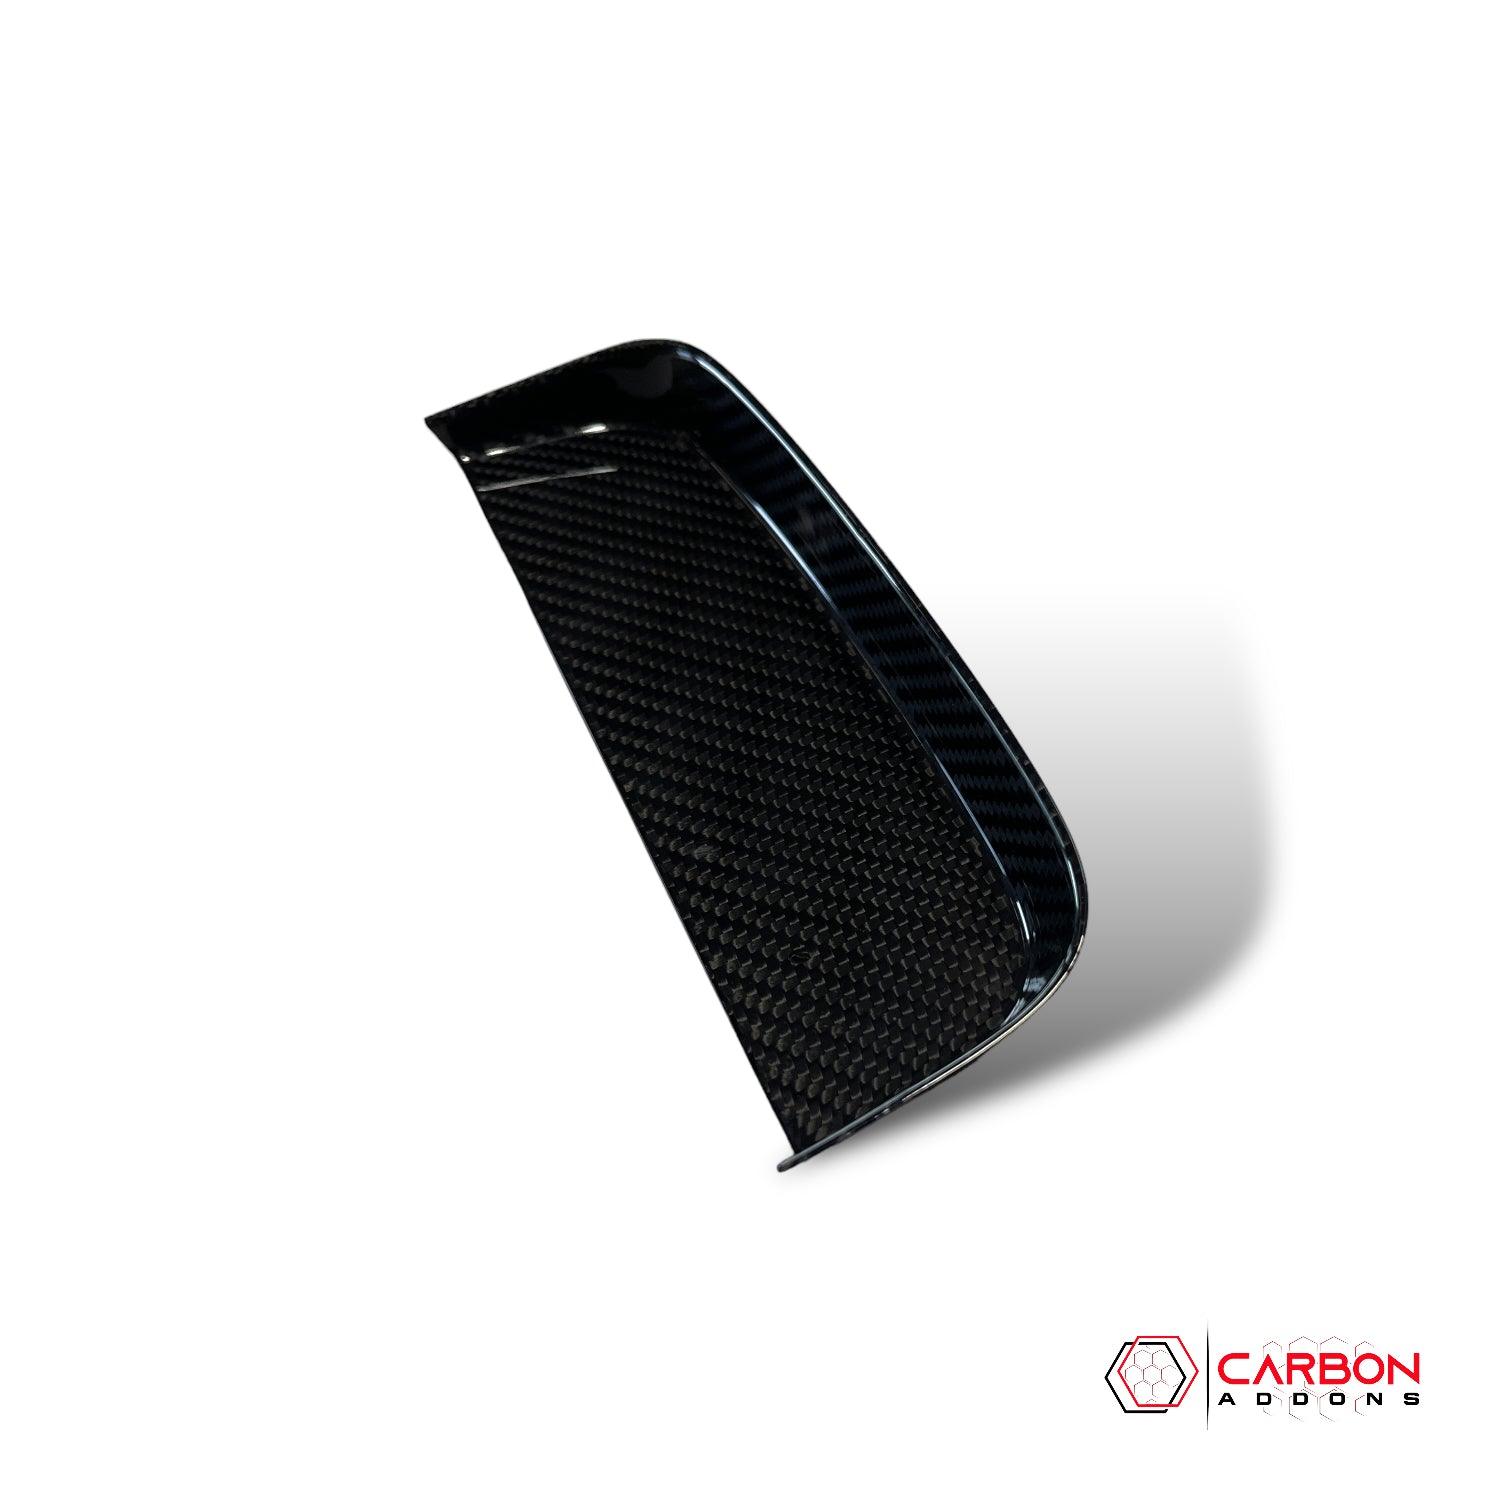 Real Carbon Fiber interior coin tray cover | 2015-2023 Ford Mustang - carbonaddons Carbon Fiber Parts, Accessories, Upgrades, Mods